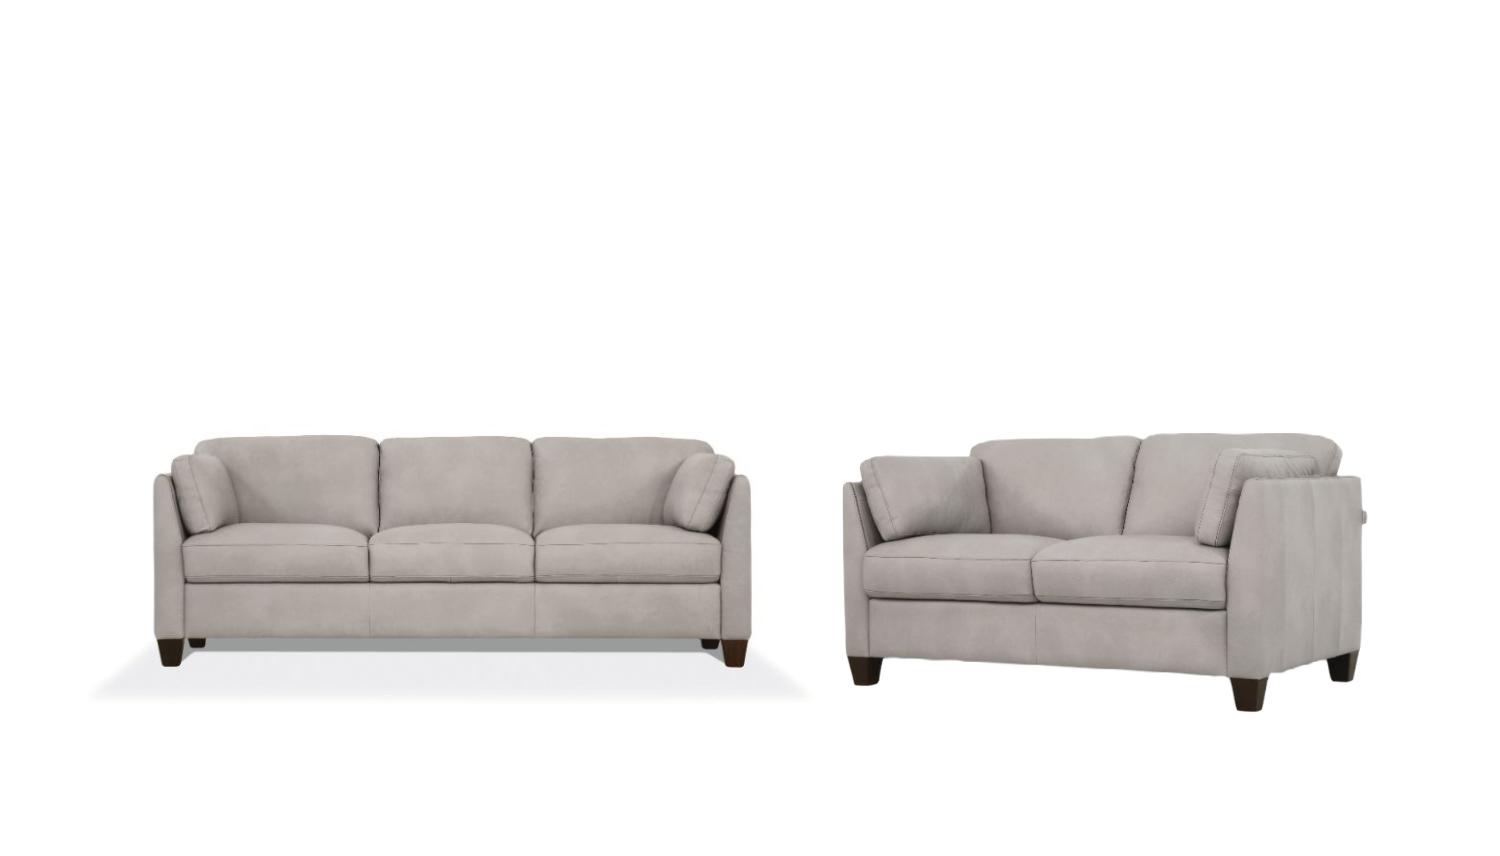 Modern, Transitional Sofa and Loveseat Set Matias 55015-2pcs in Light Beige Leather